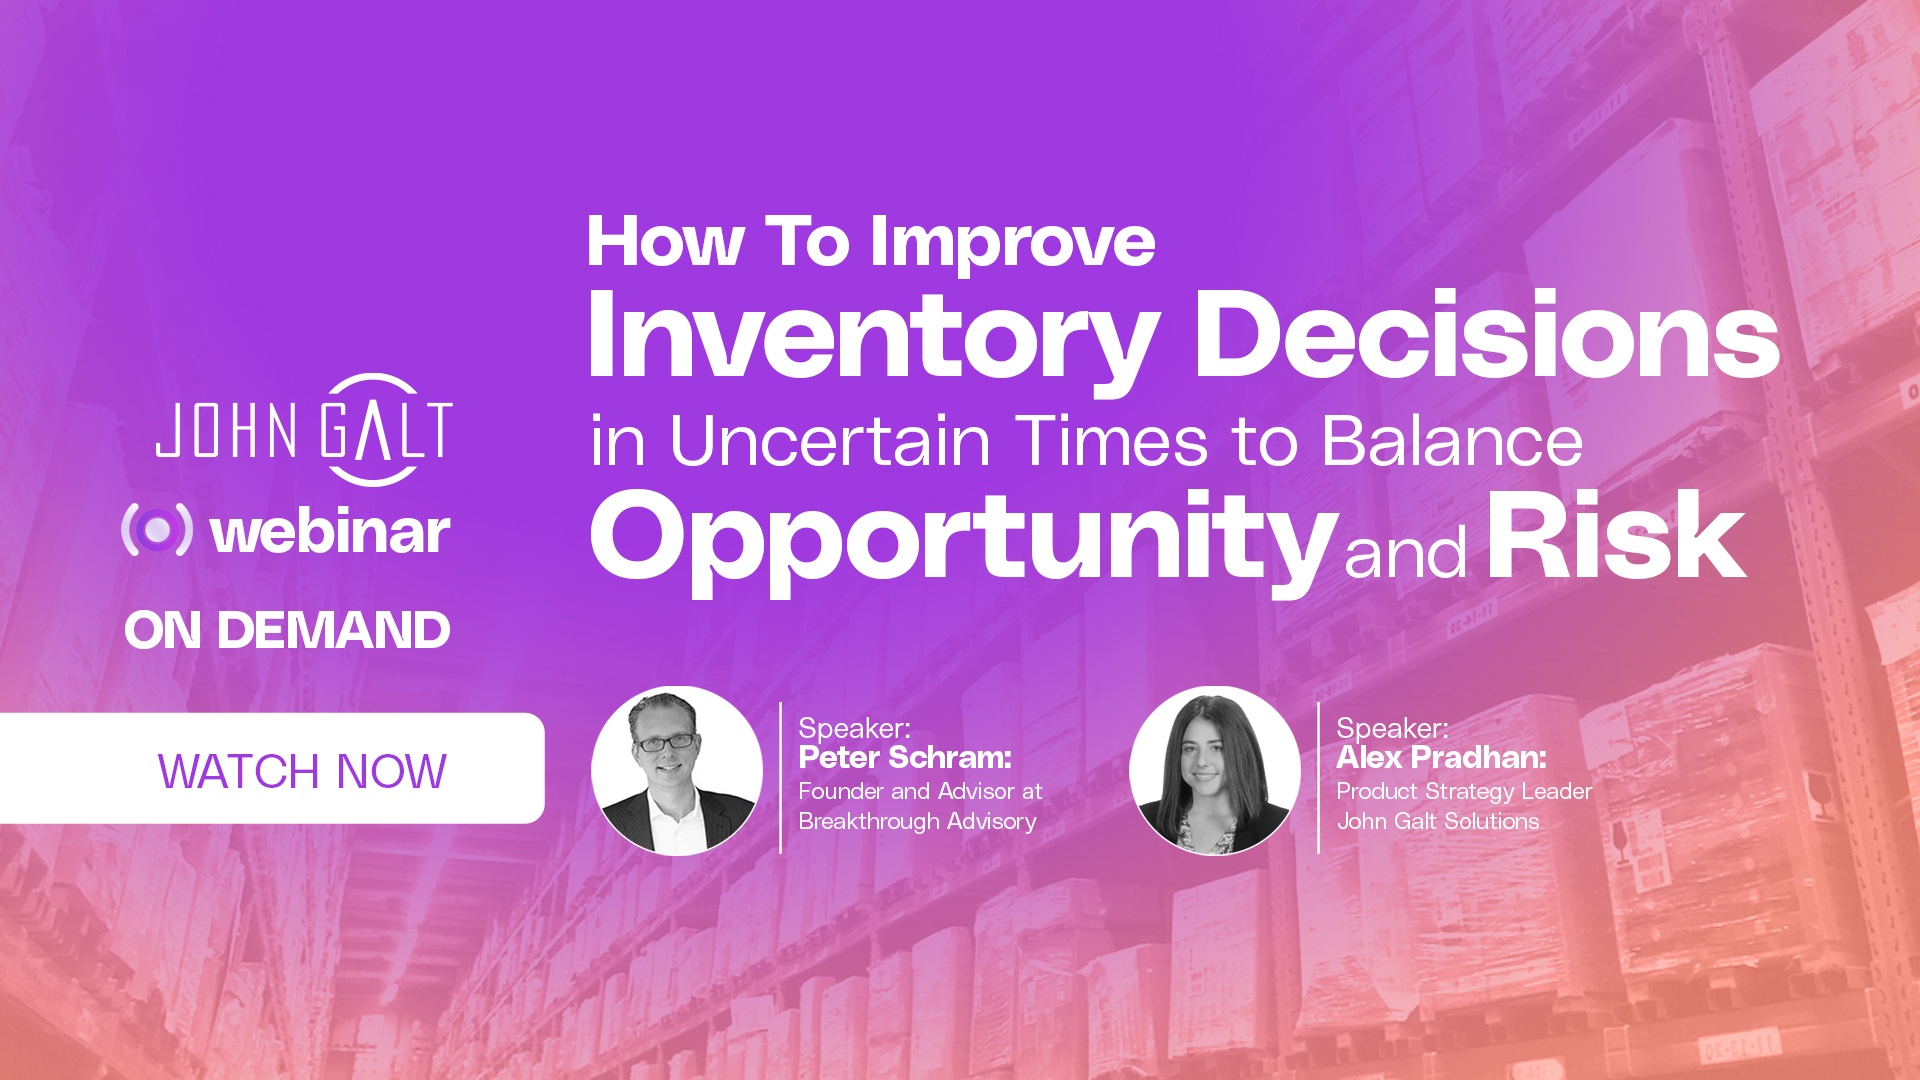 How to Improve Inventory Decisions in Uncertain Times to Balance Opportunity and Risk